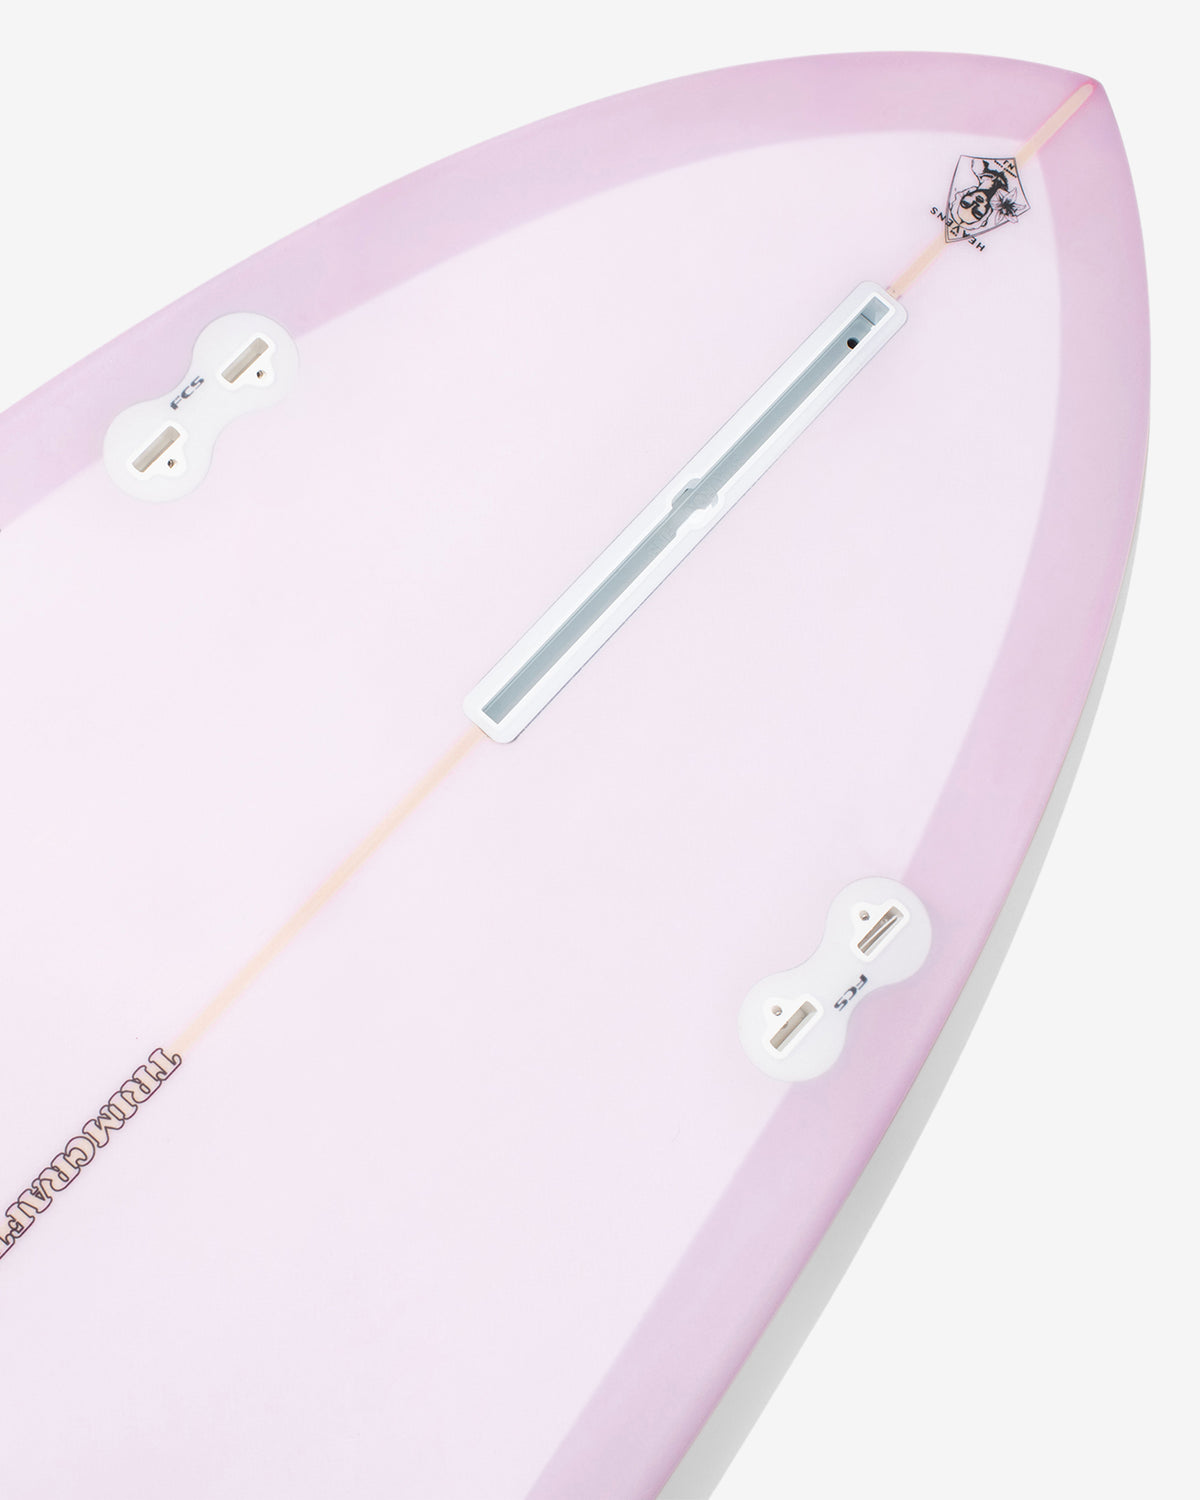 What The World Needs Surfboard